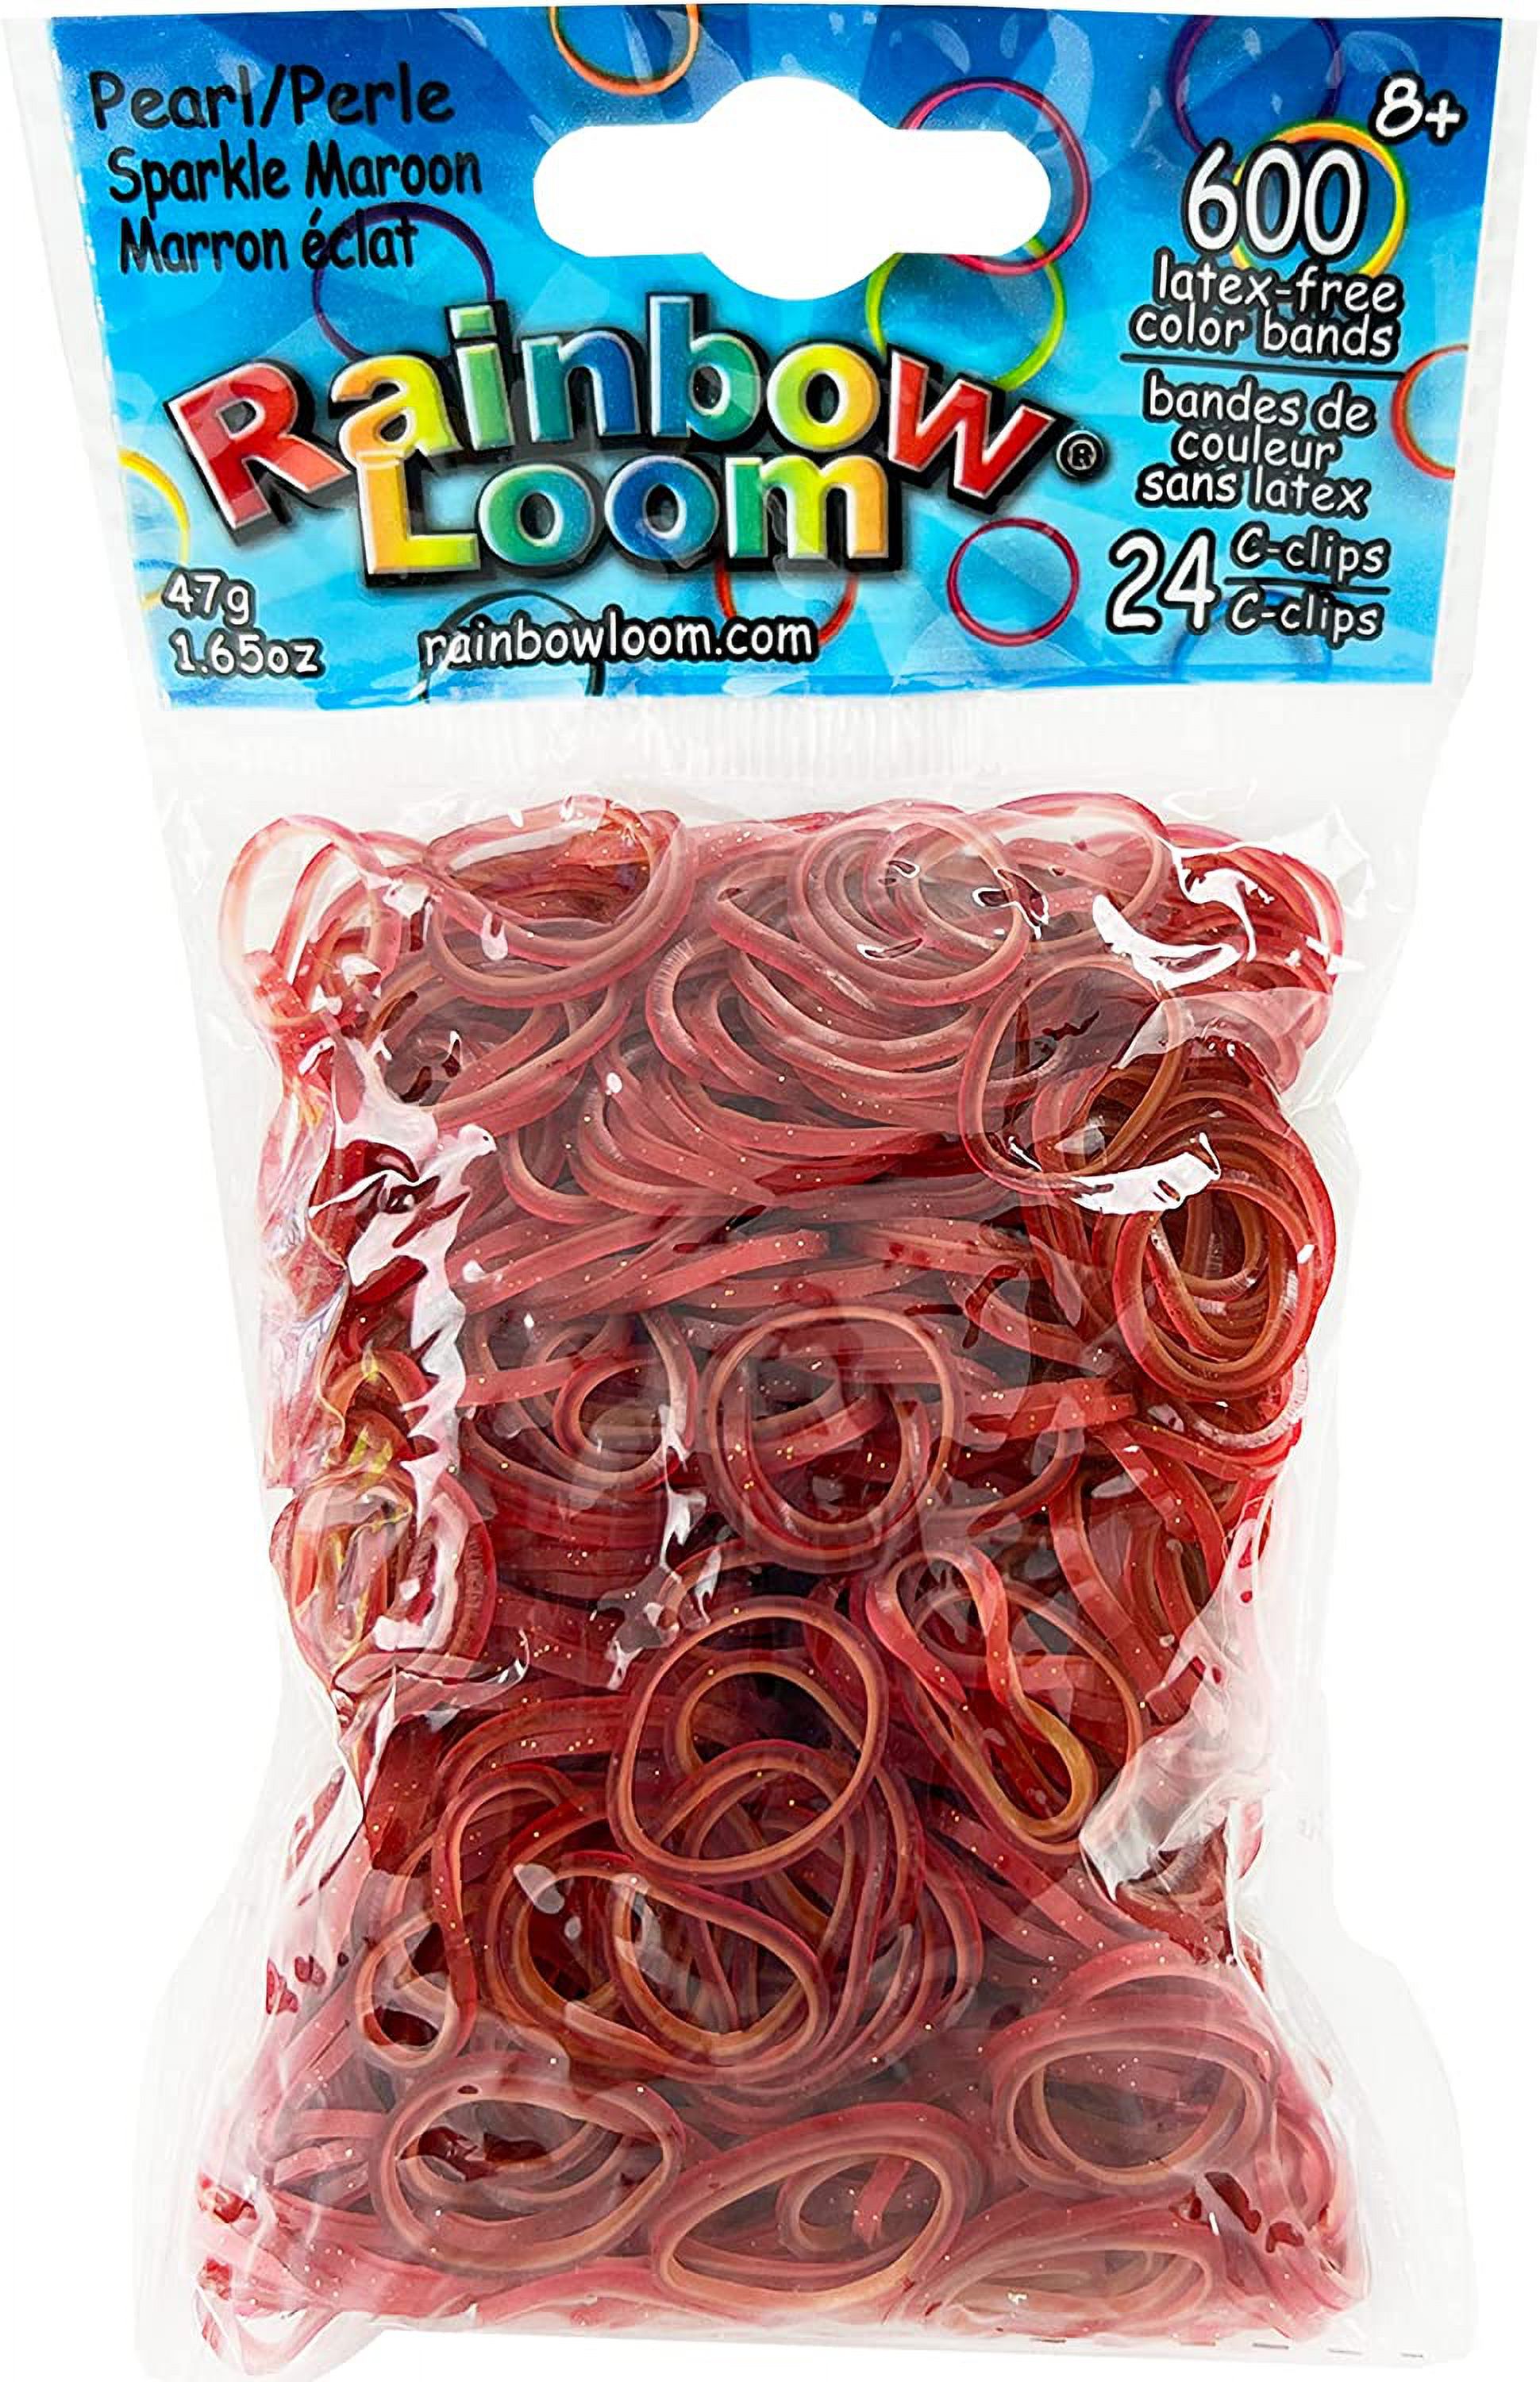 Rainbow Loom Pearl Sparkle Maroon Rubber Bands Refill Pack [600 ct]